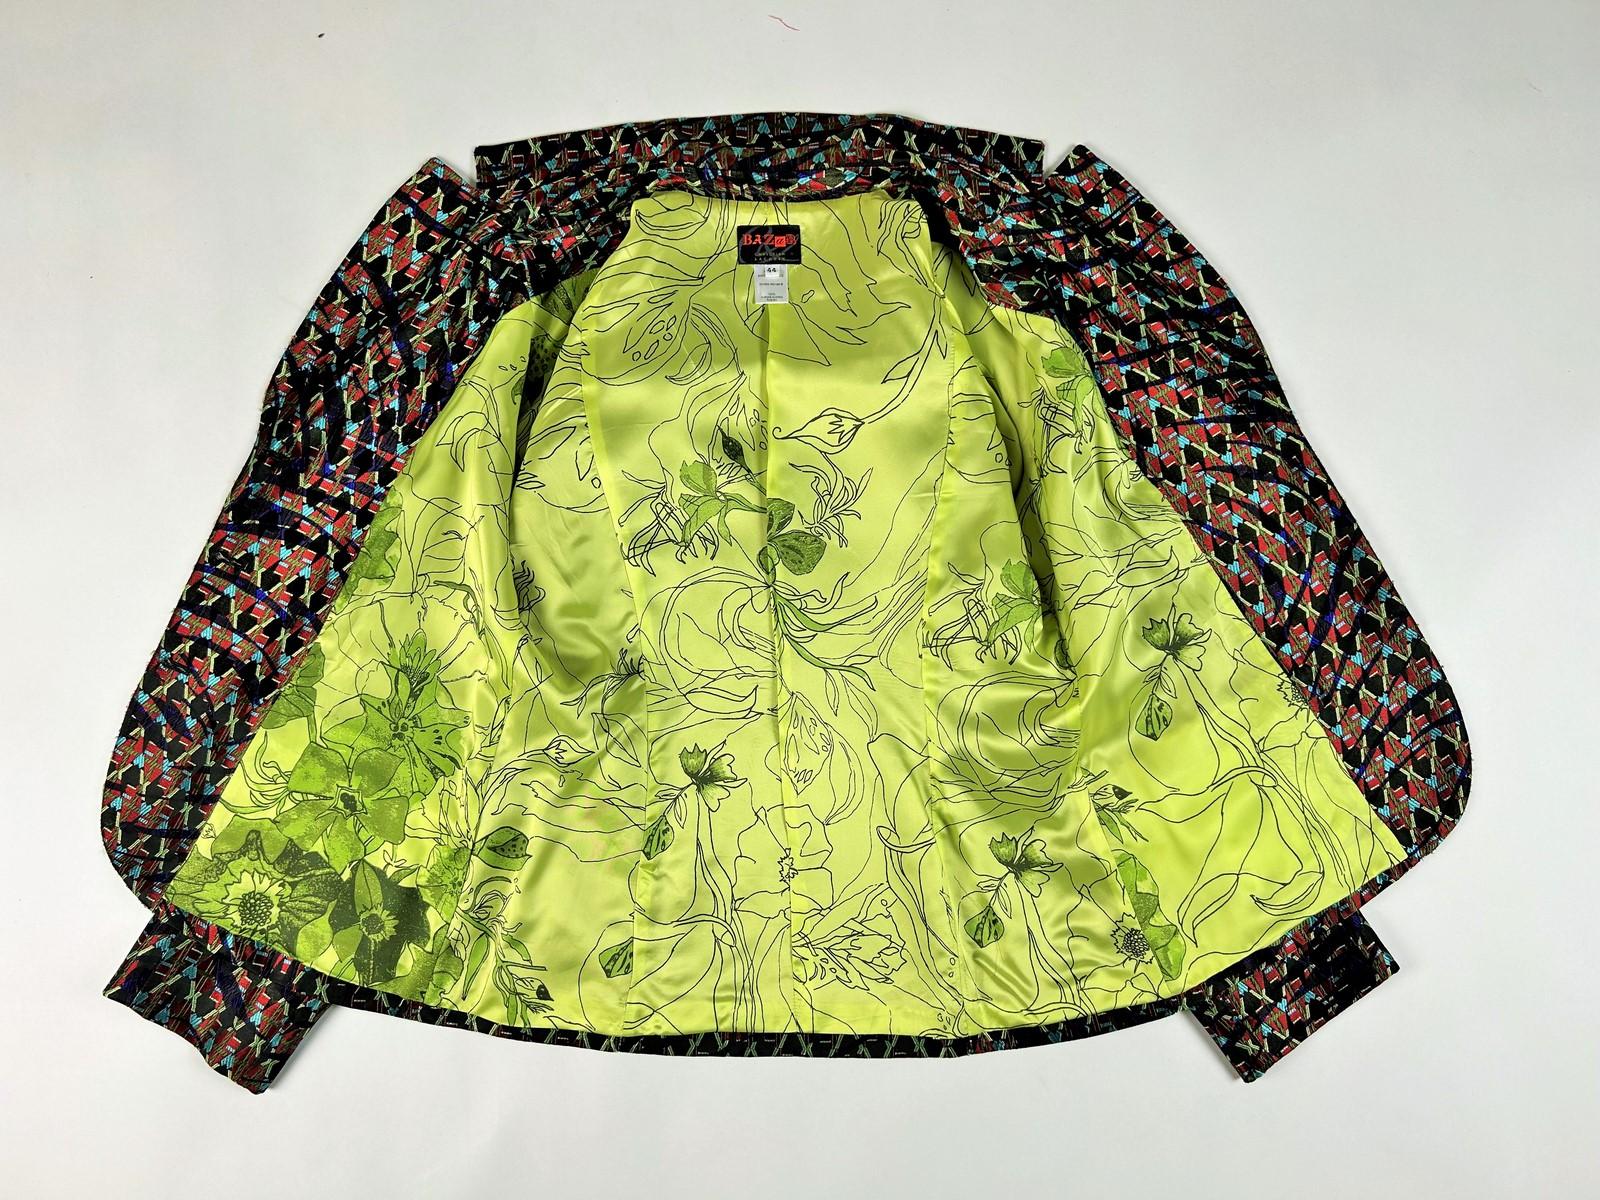 Art Deco-inspired lamé jacket by Christian Lacroix Circa 2000 For Sale 9